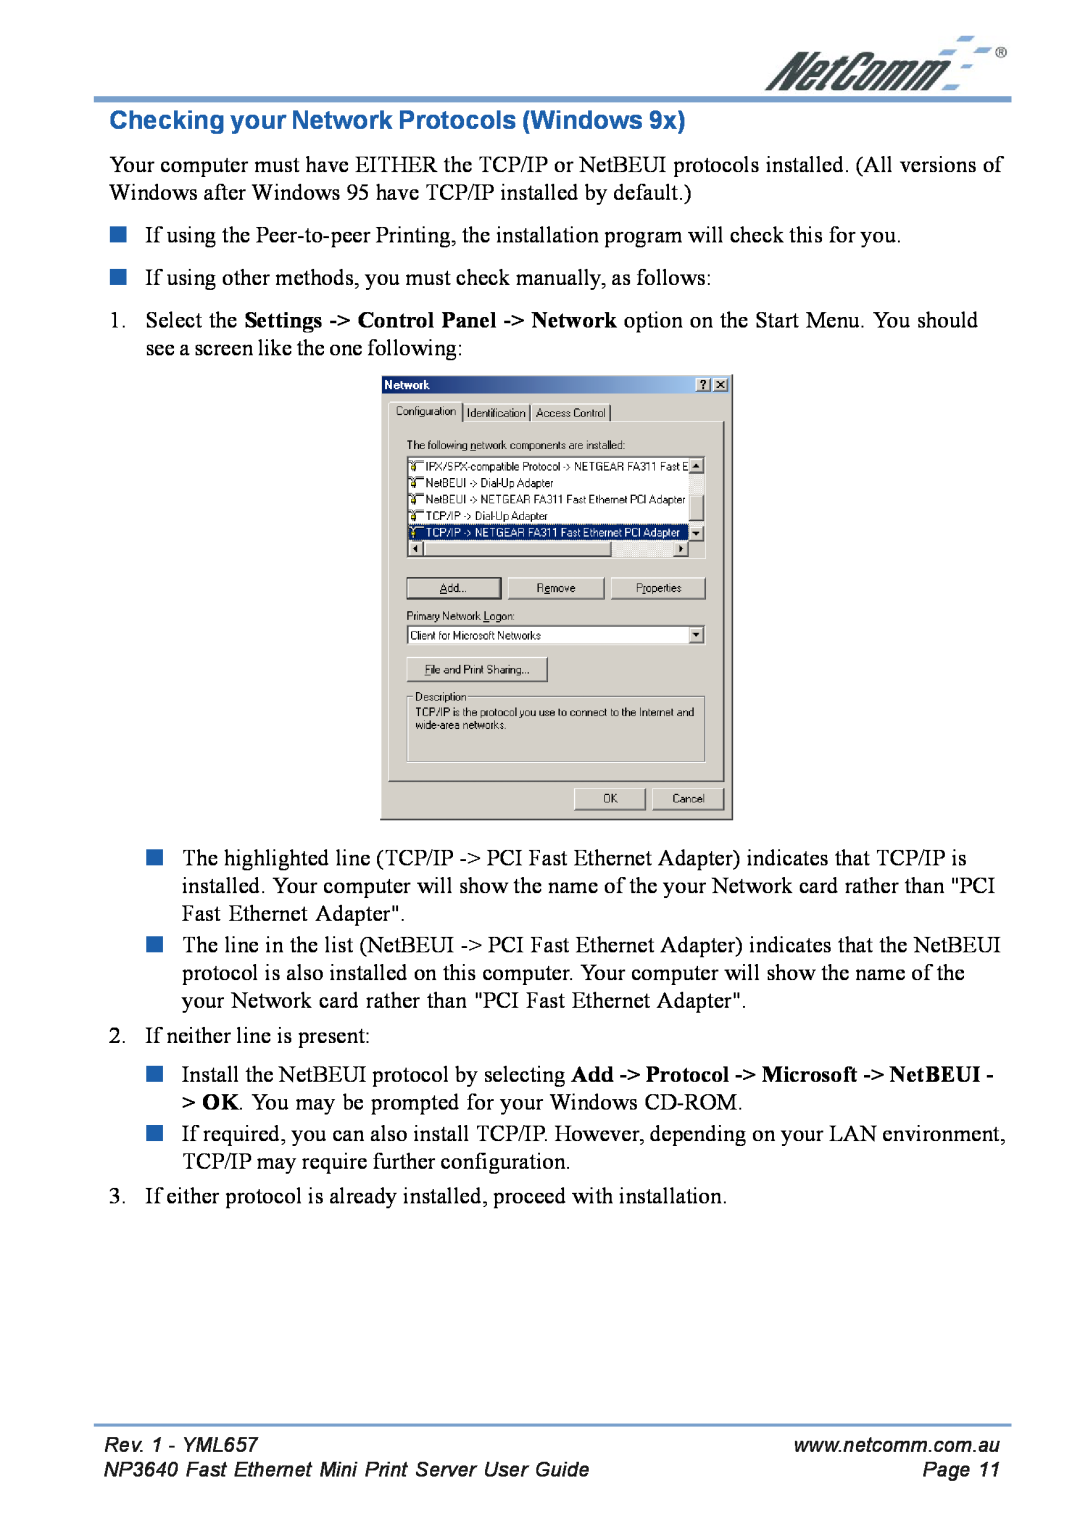 NetComm NP3640 manual Checking your Network Protocols Windows 